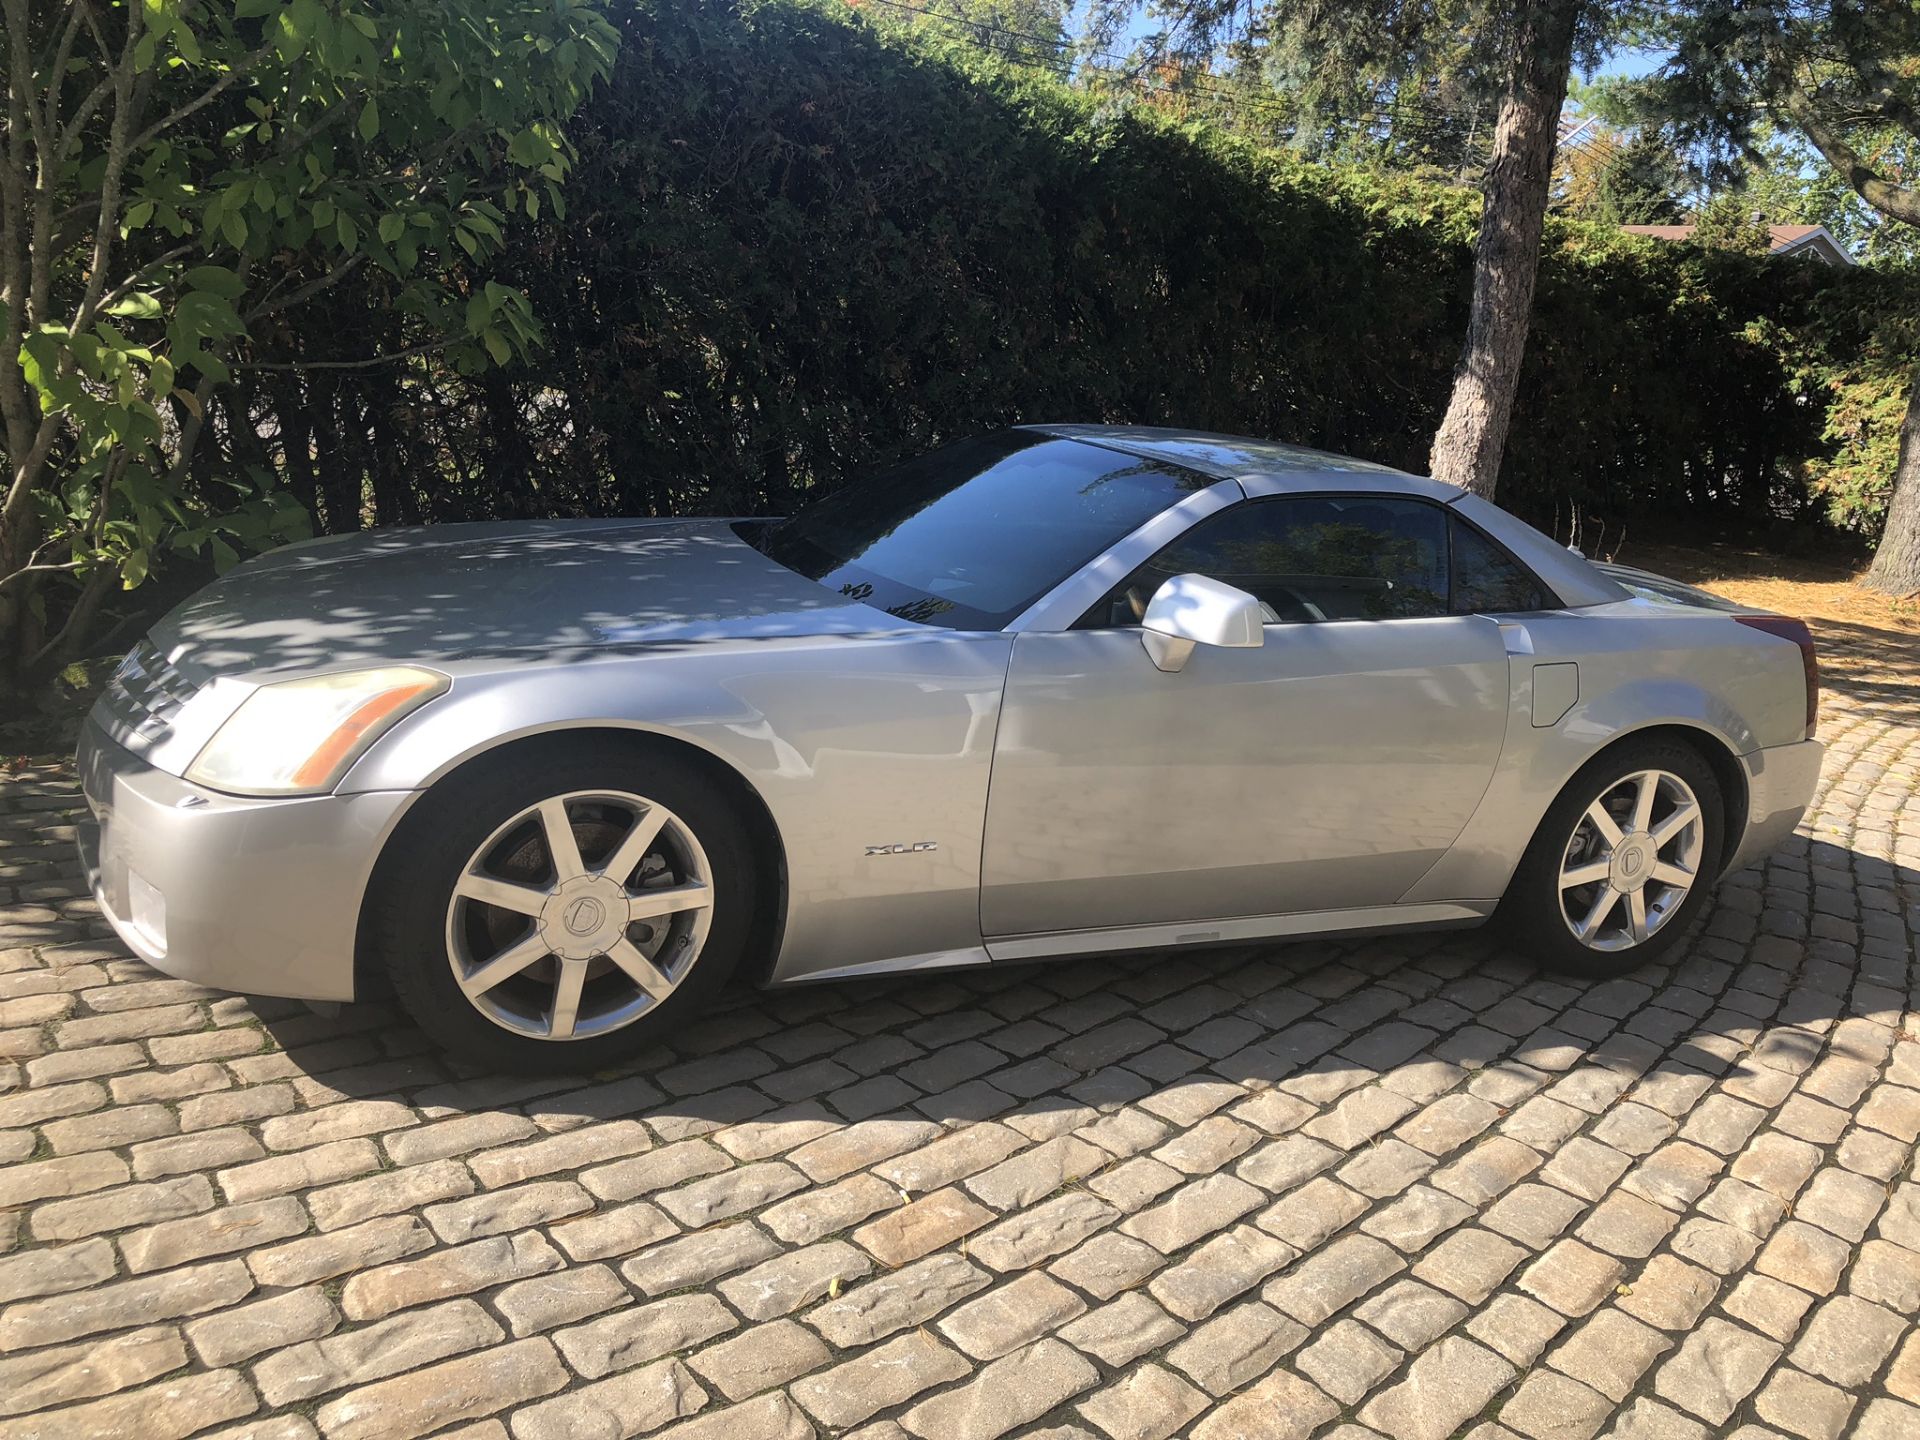 (2005) Cadillac XLR Convertible Fully Equipped. - Image 4 of 10